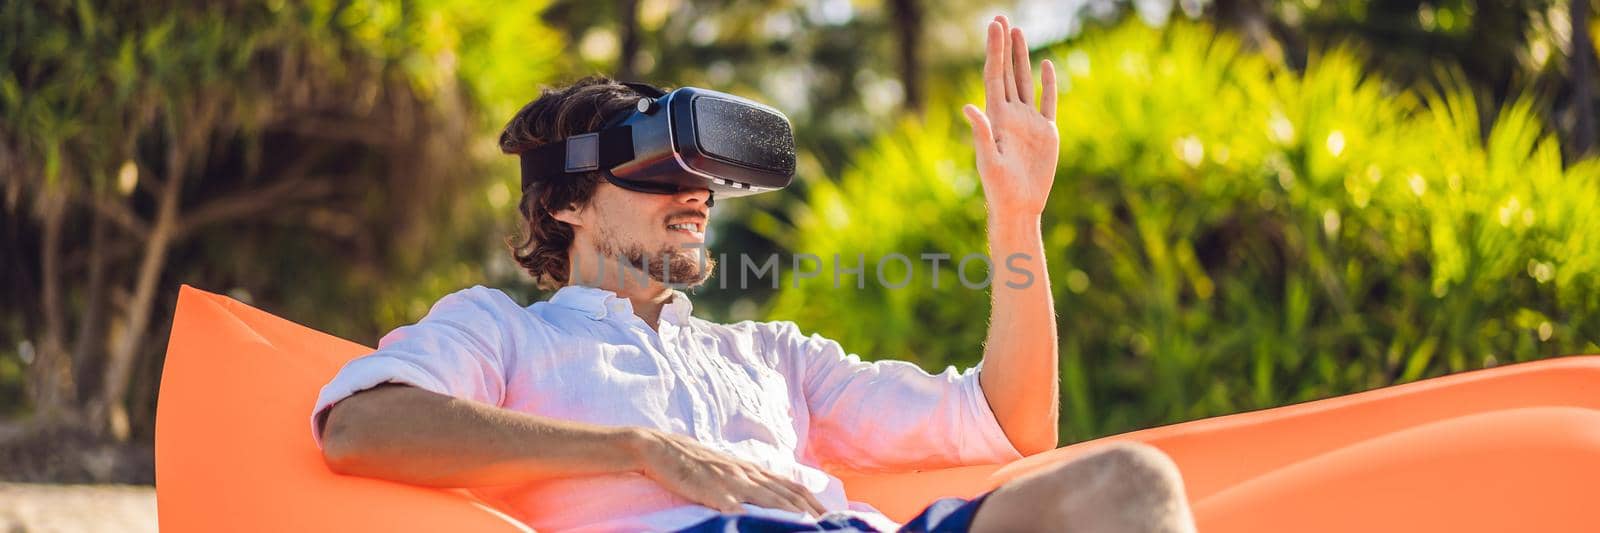 BANNER, LONG FORMAT Summer lifestyle portrait of man sitting on the orange inflatable sofa and uses virtual reality headset on the beach of tropical island. Relaxing and enjoying life on air bed by galitskaya